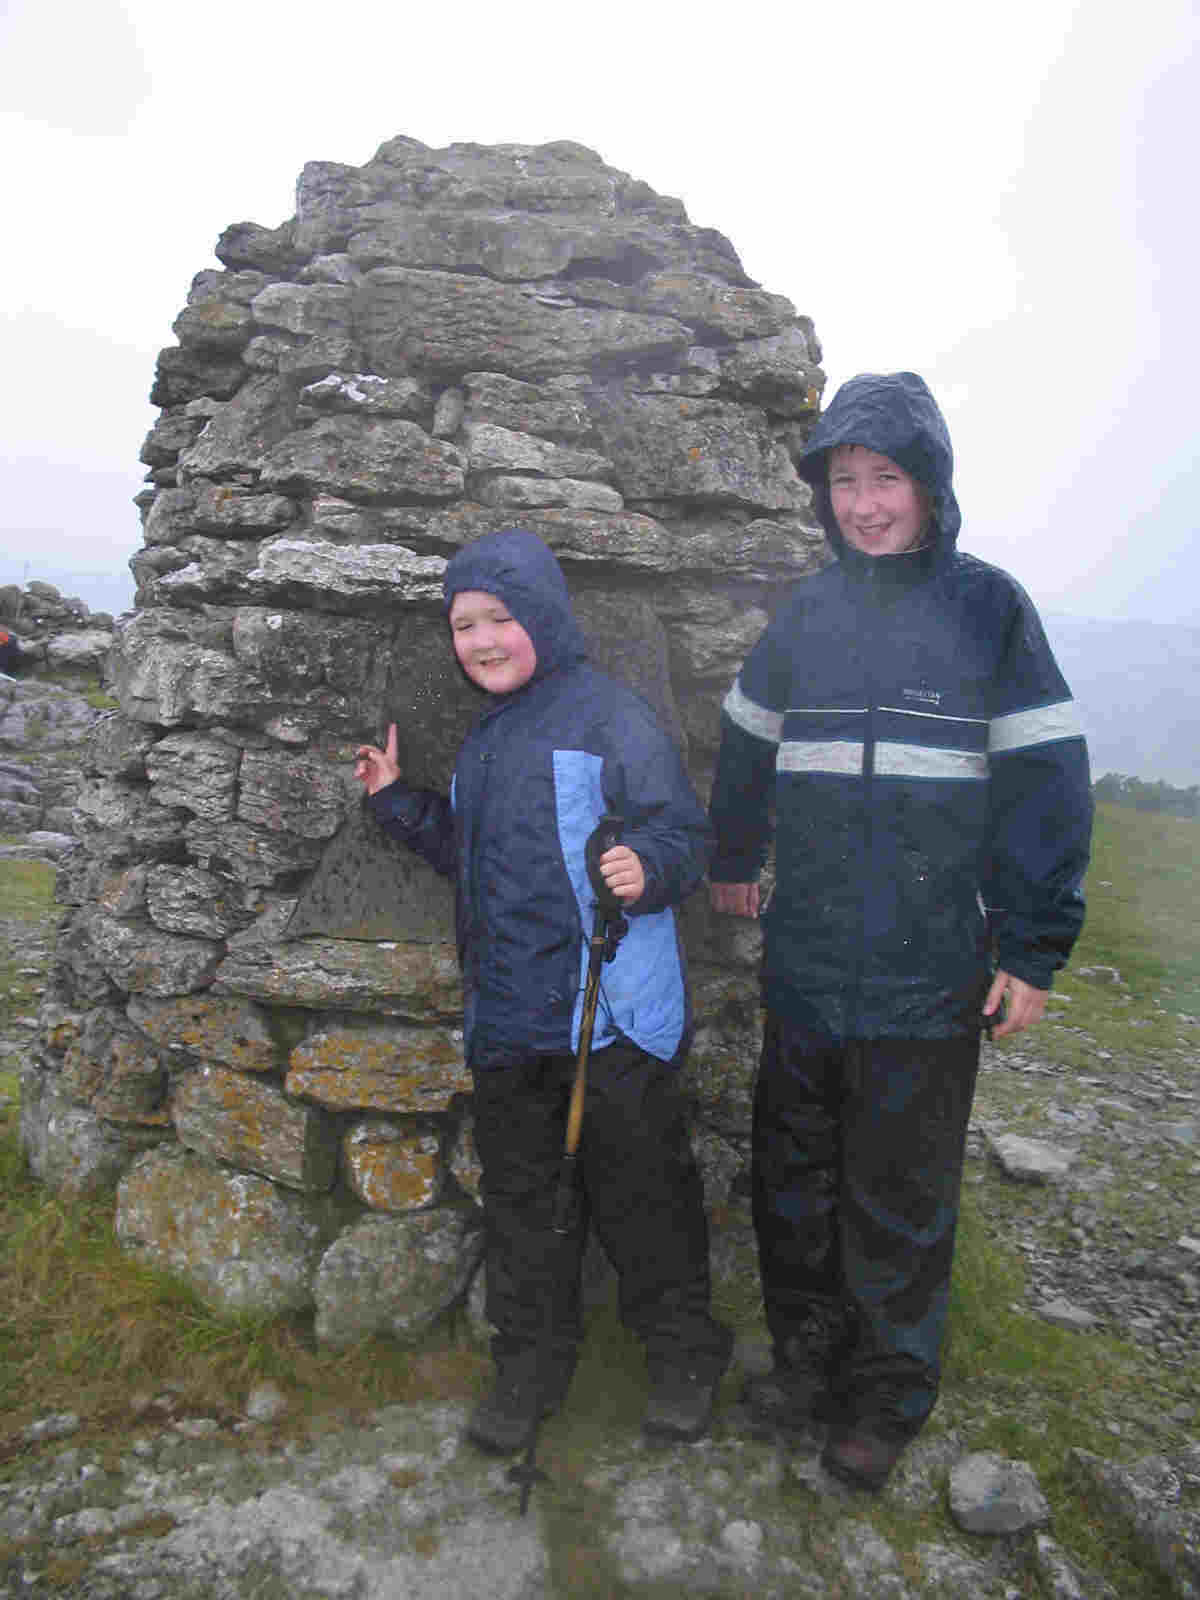 Liam & Jimmy at the summit monument on Whitbarrow (Lord's Seat)